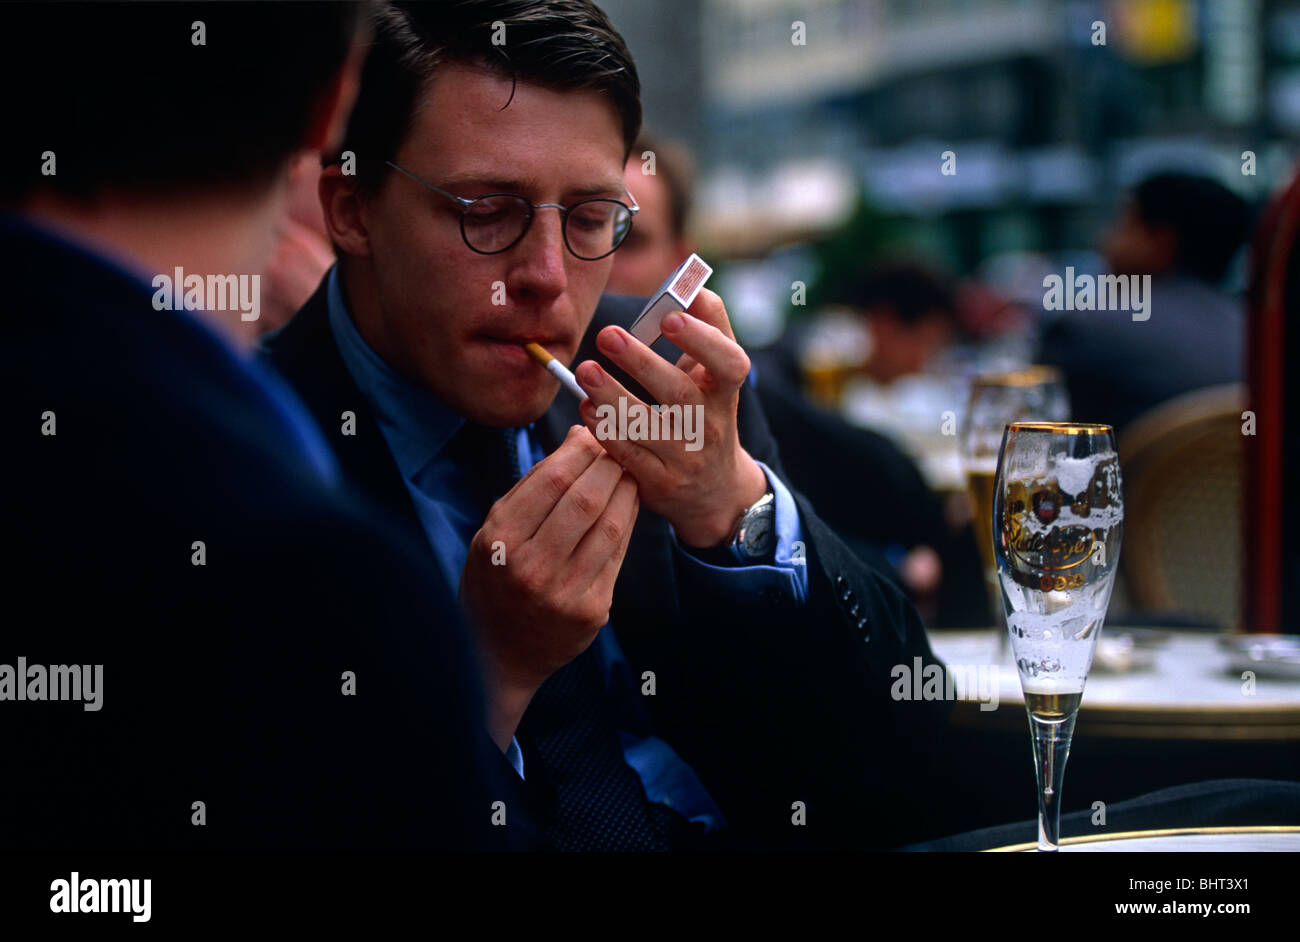 Striking a light in an outdoor café, a young businessman puts a match to his cigarette as a colleague talks in Frankfurt. Stock Photo